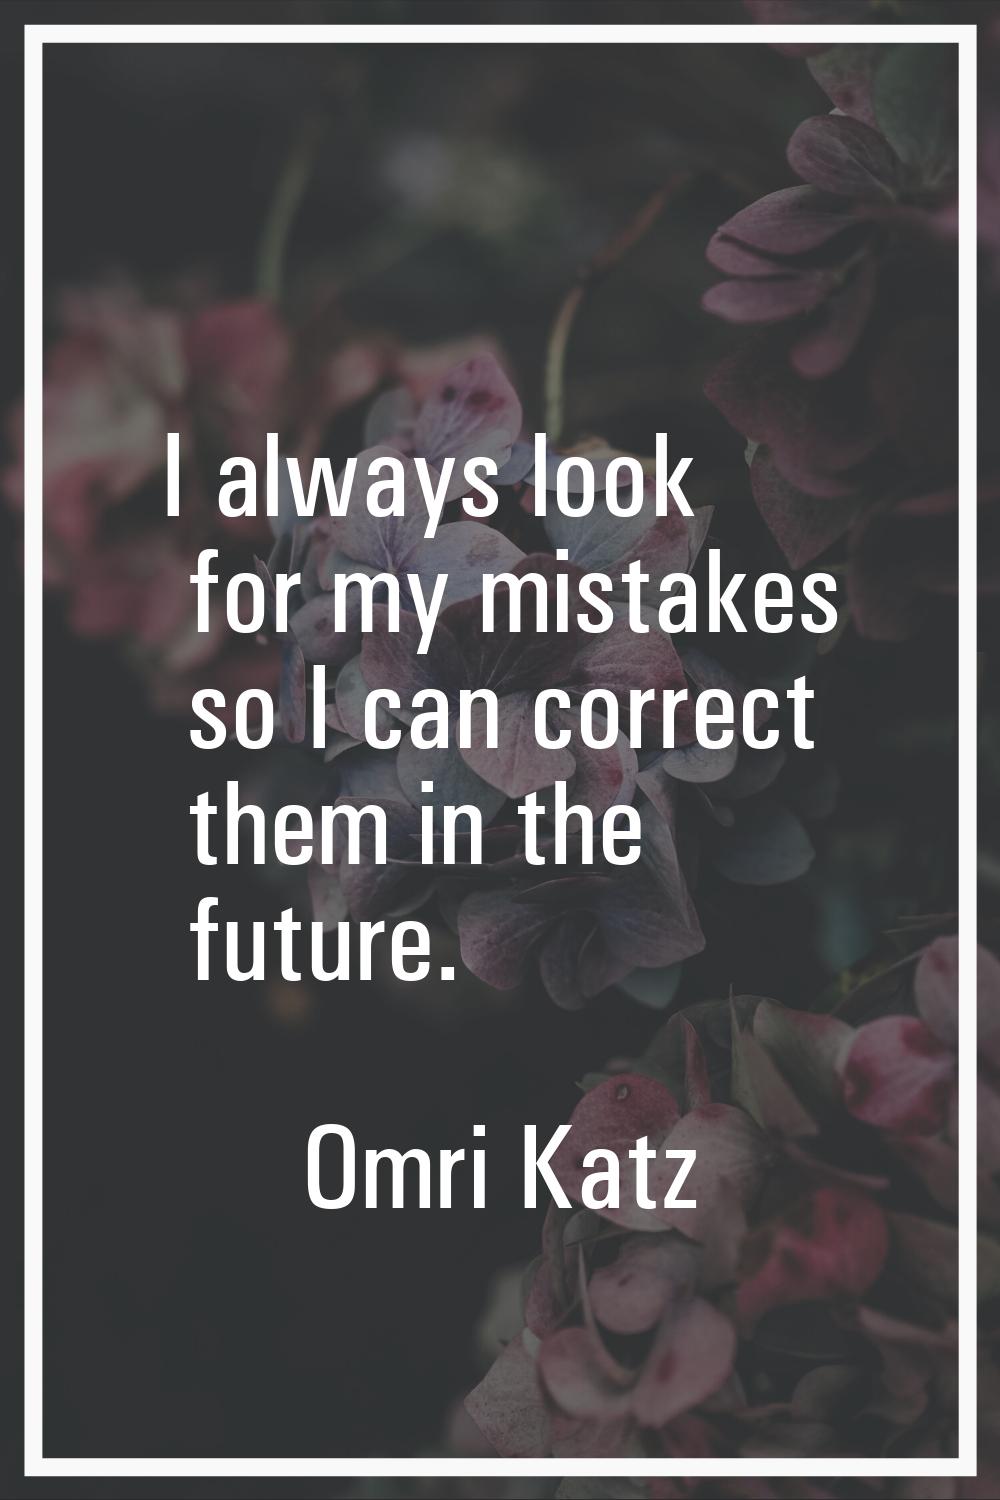 I always look for my mistakes so I can correct them in the future.